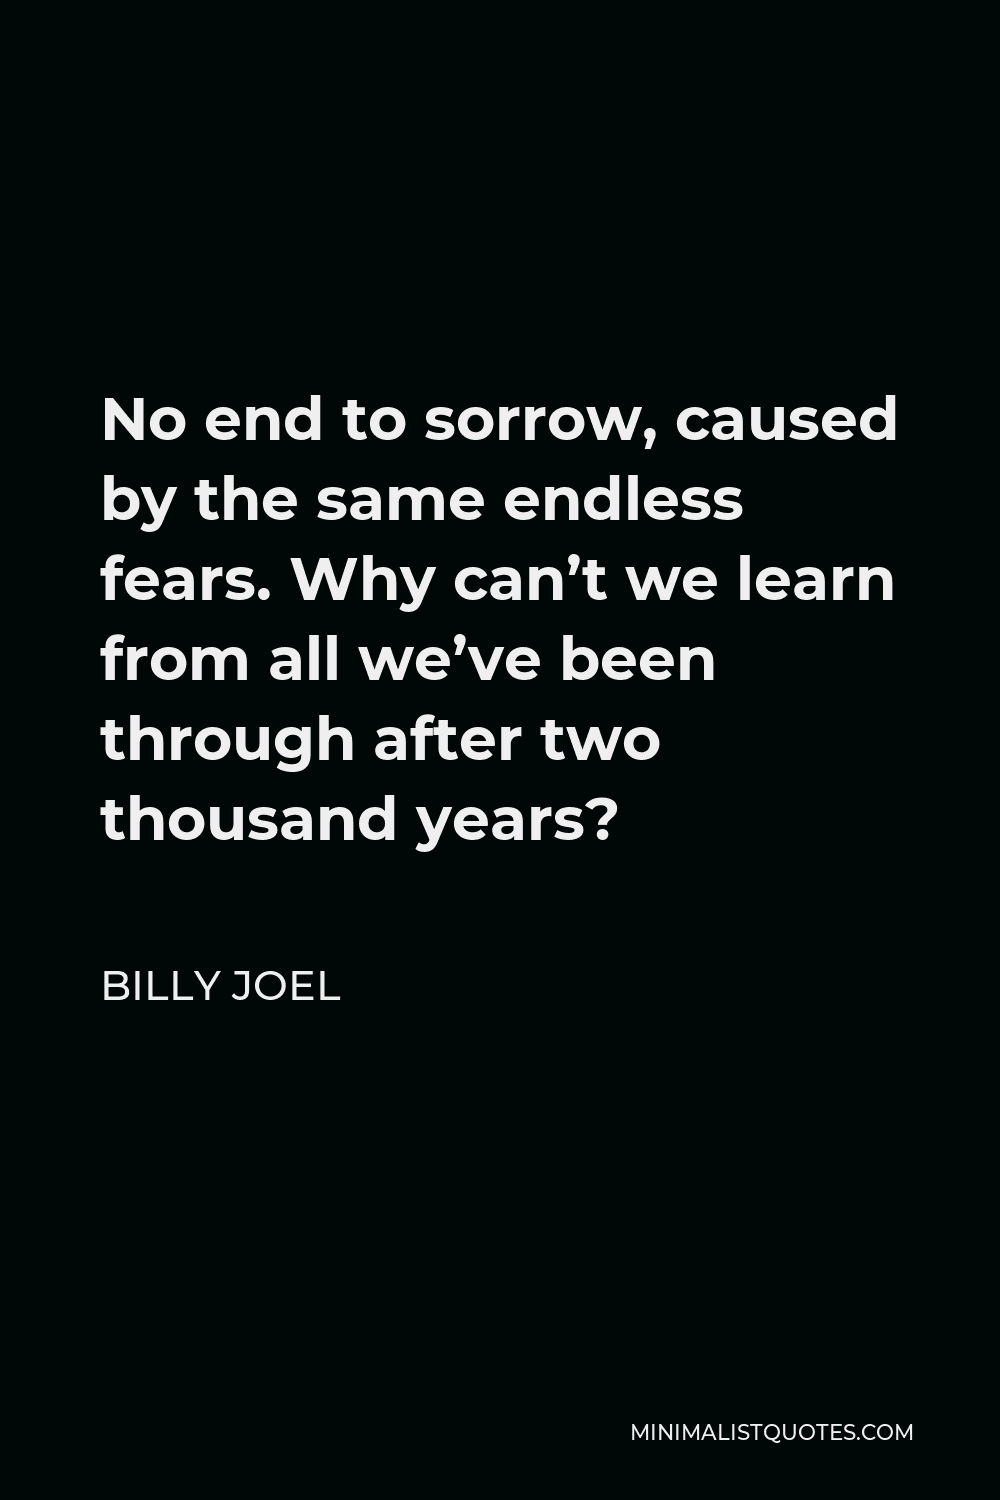 Billy Joel Quote - No end to sorrow, caused by the same endless fears. Why can’t we learn from all we’ve been through after two thousand years?